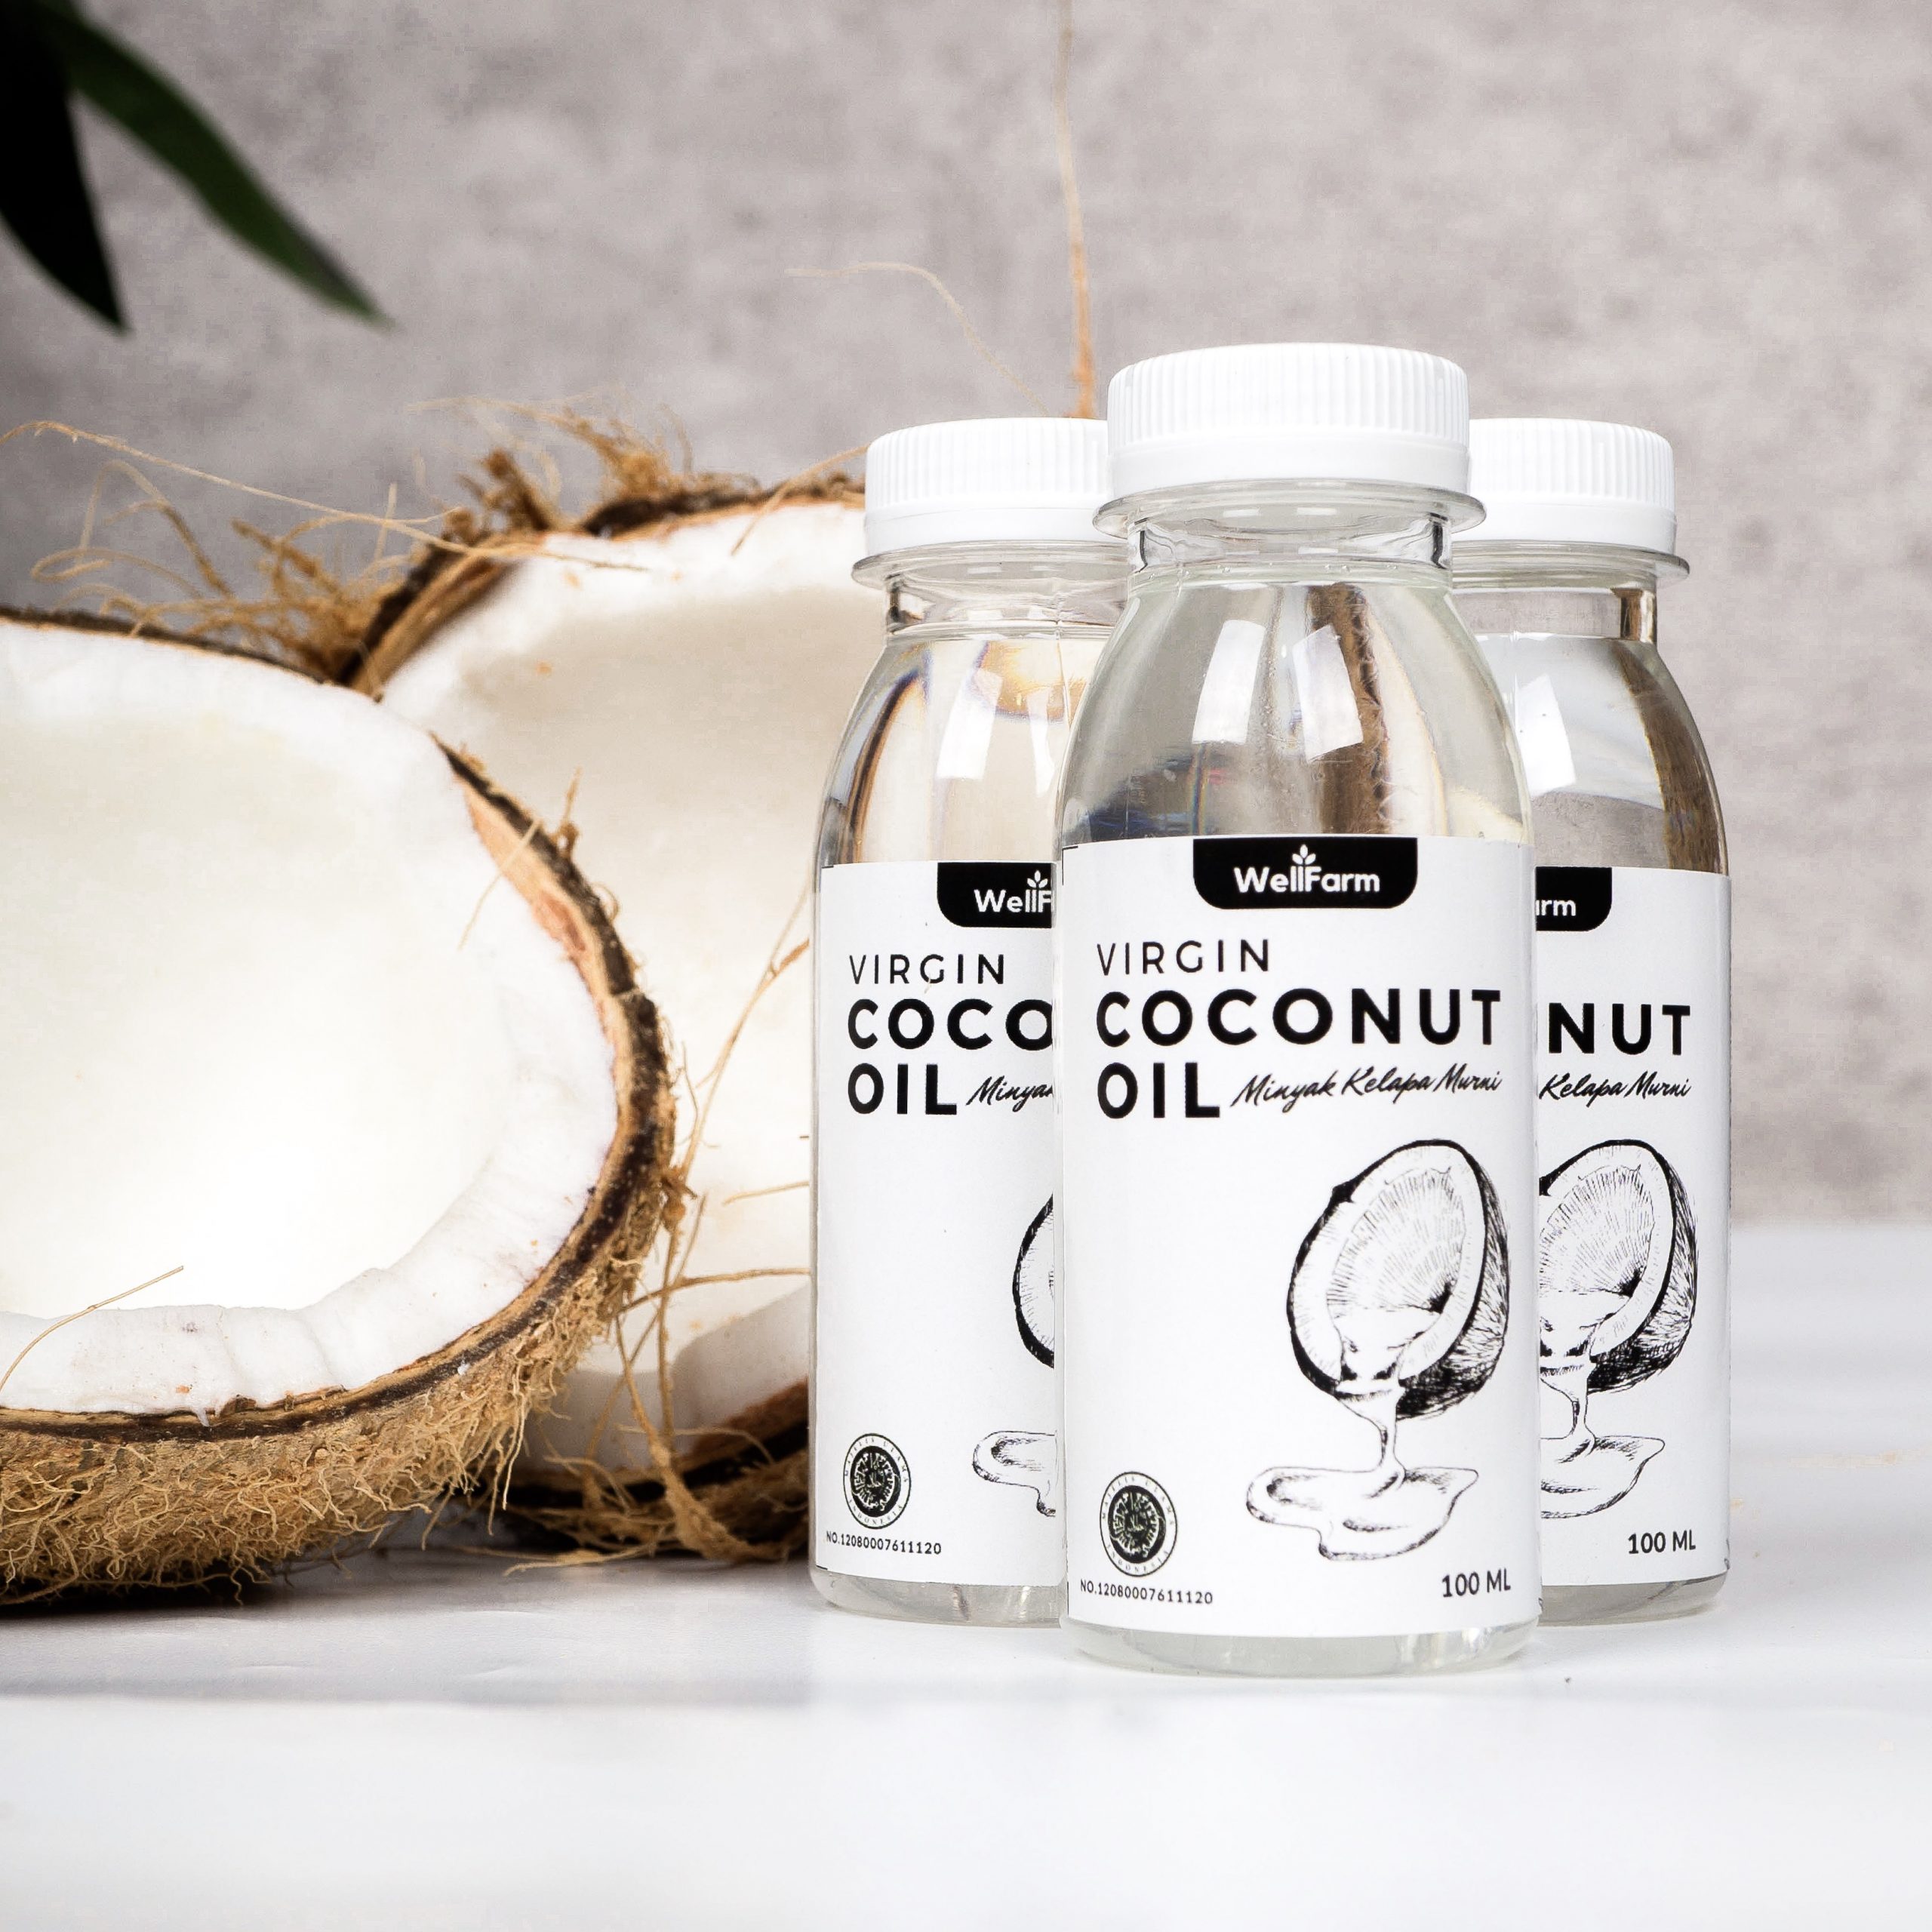 Read more about the article Peluang Bisnis : Open Reseller VCO Virgin Coconut Oil Wellfarm